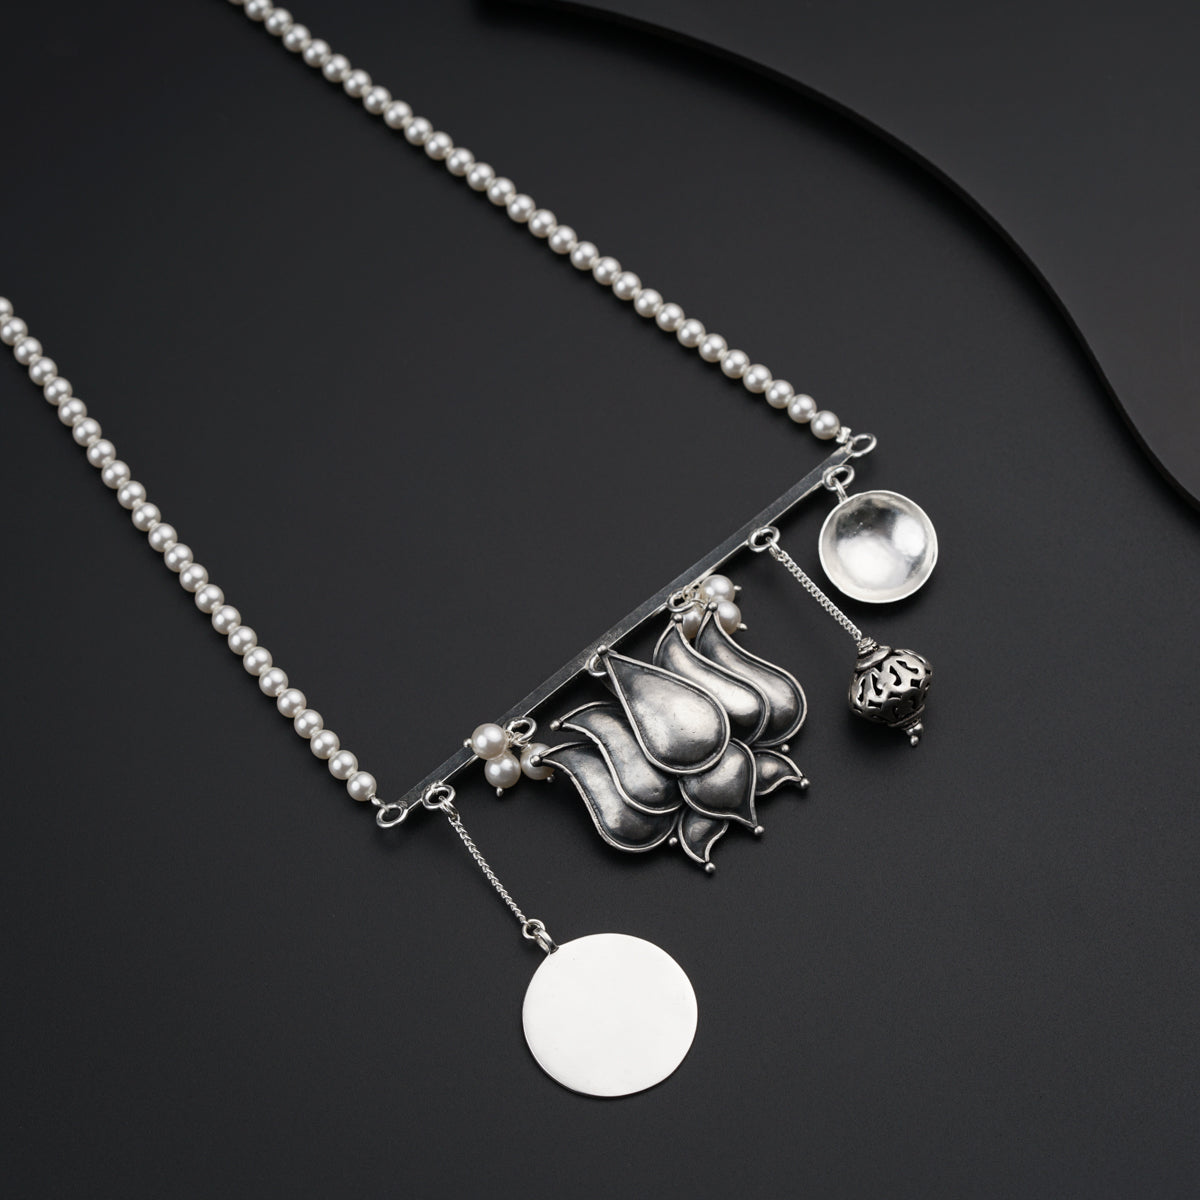 a necklace that has a silver object on it